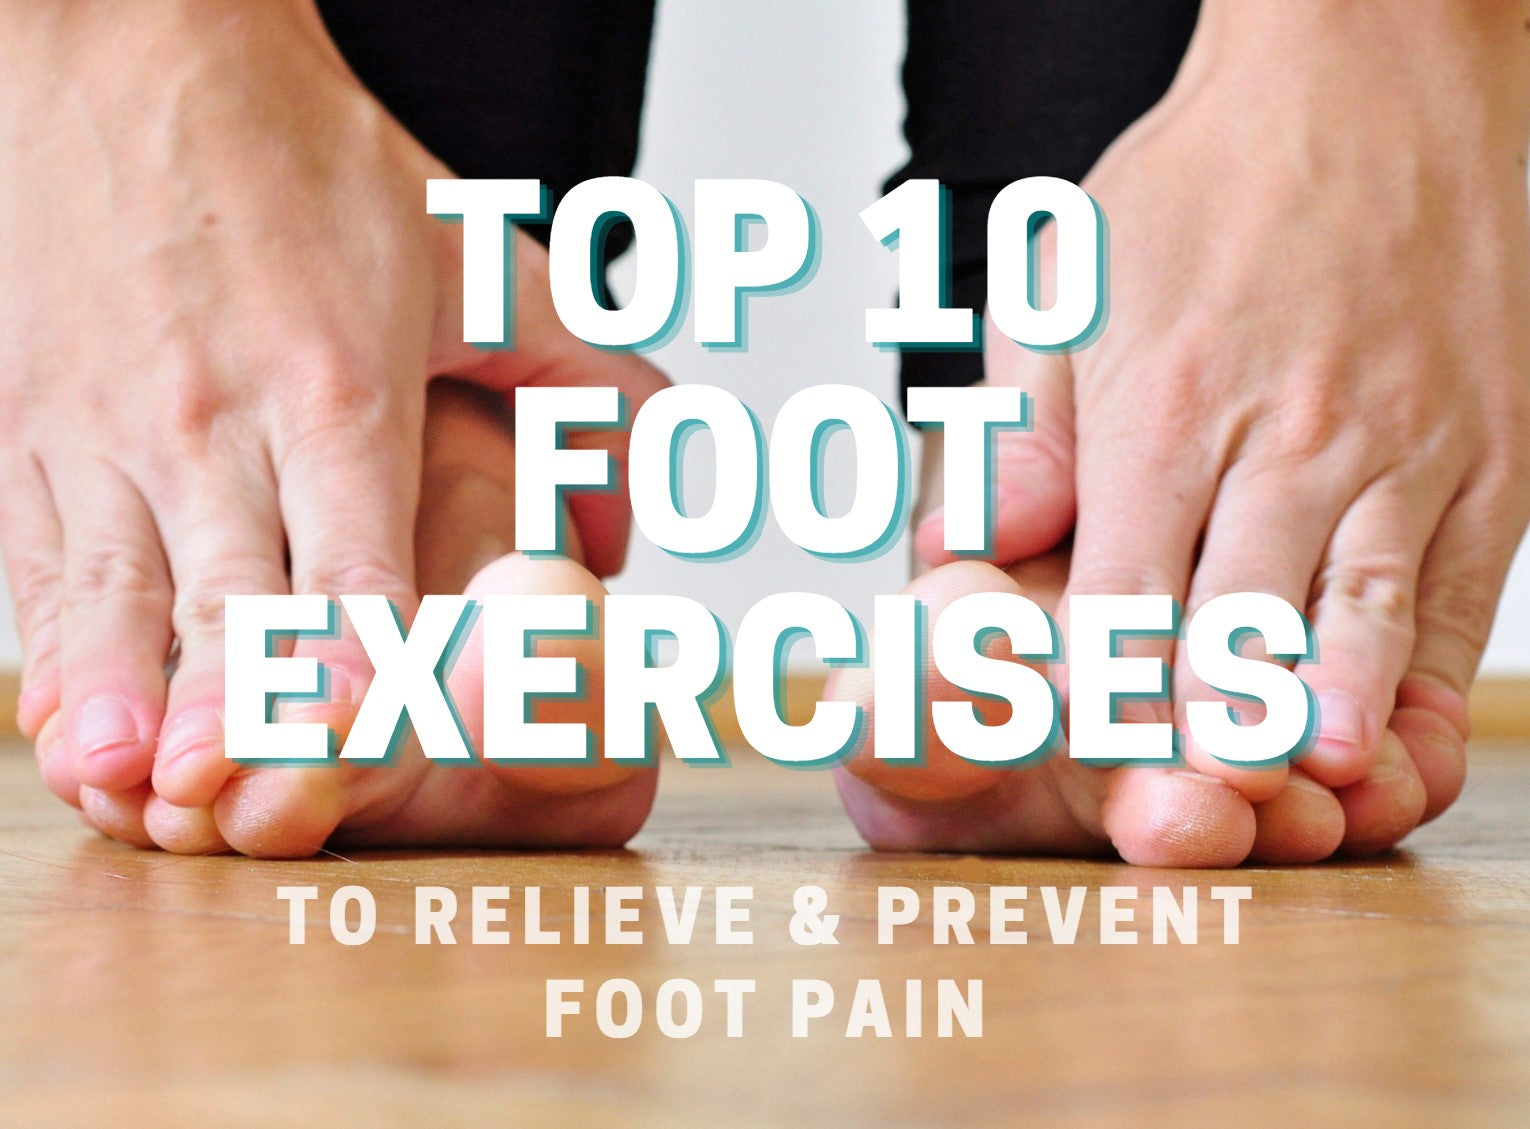 Best Foot Exercises for Plantar Fasciitis, Bunion Pain, Foot Pain